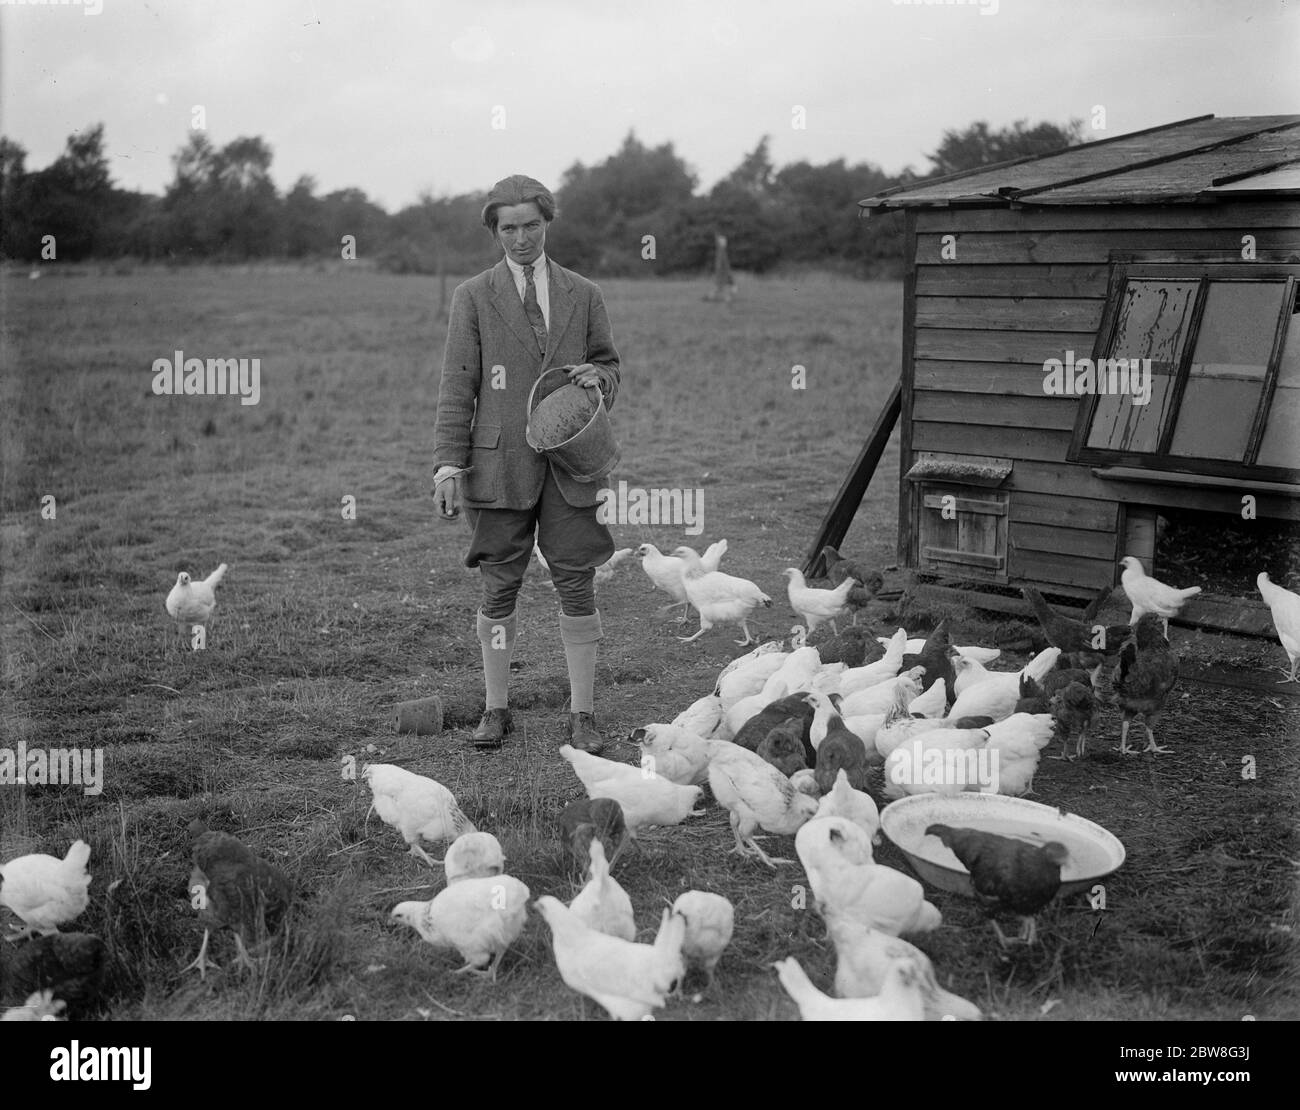 Chicken farm Black and White Stock Photos & Images - Alamy